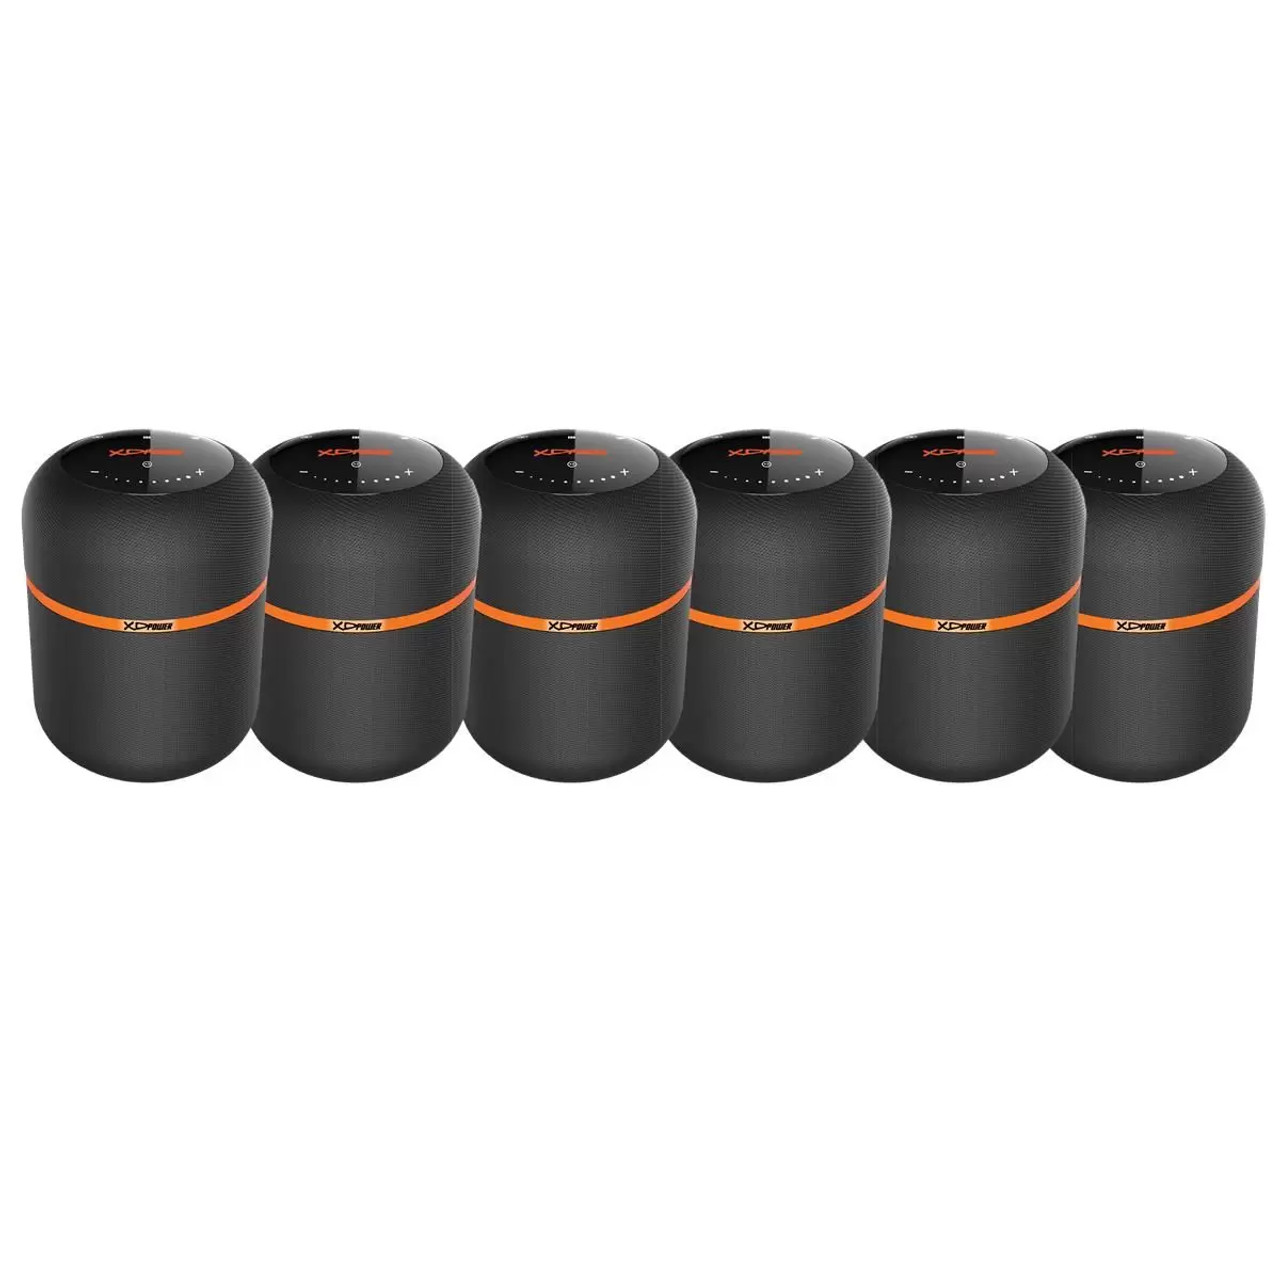 6 Pack of Portable Bluetooth Speakers